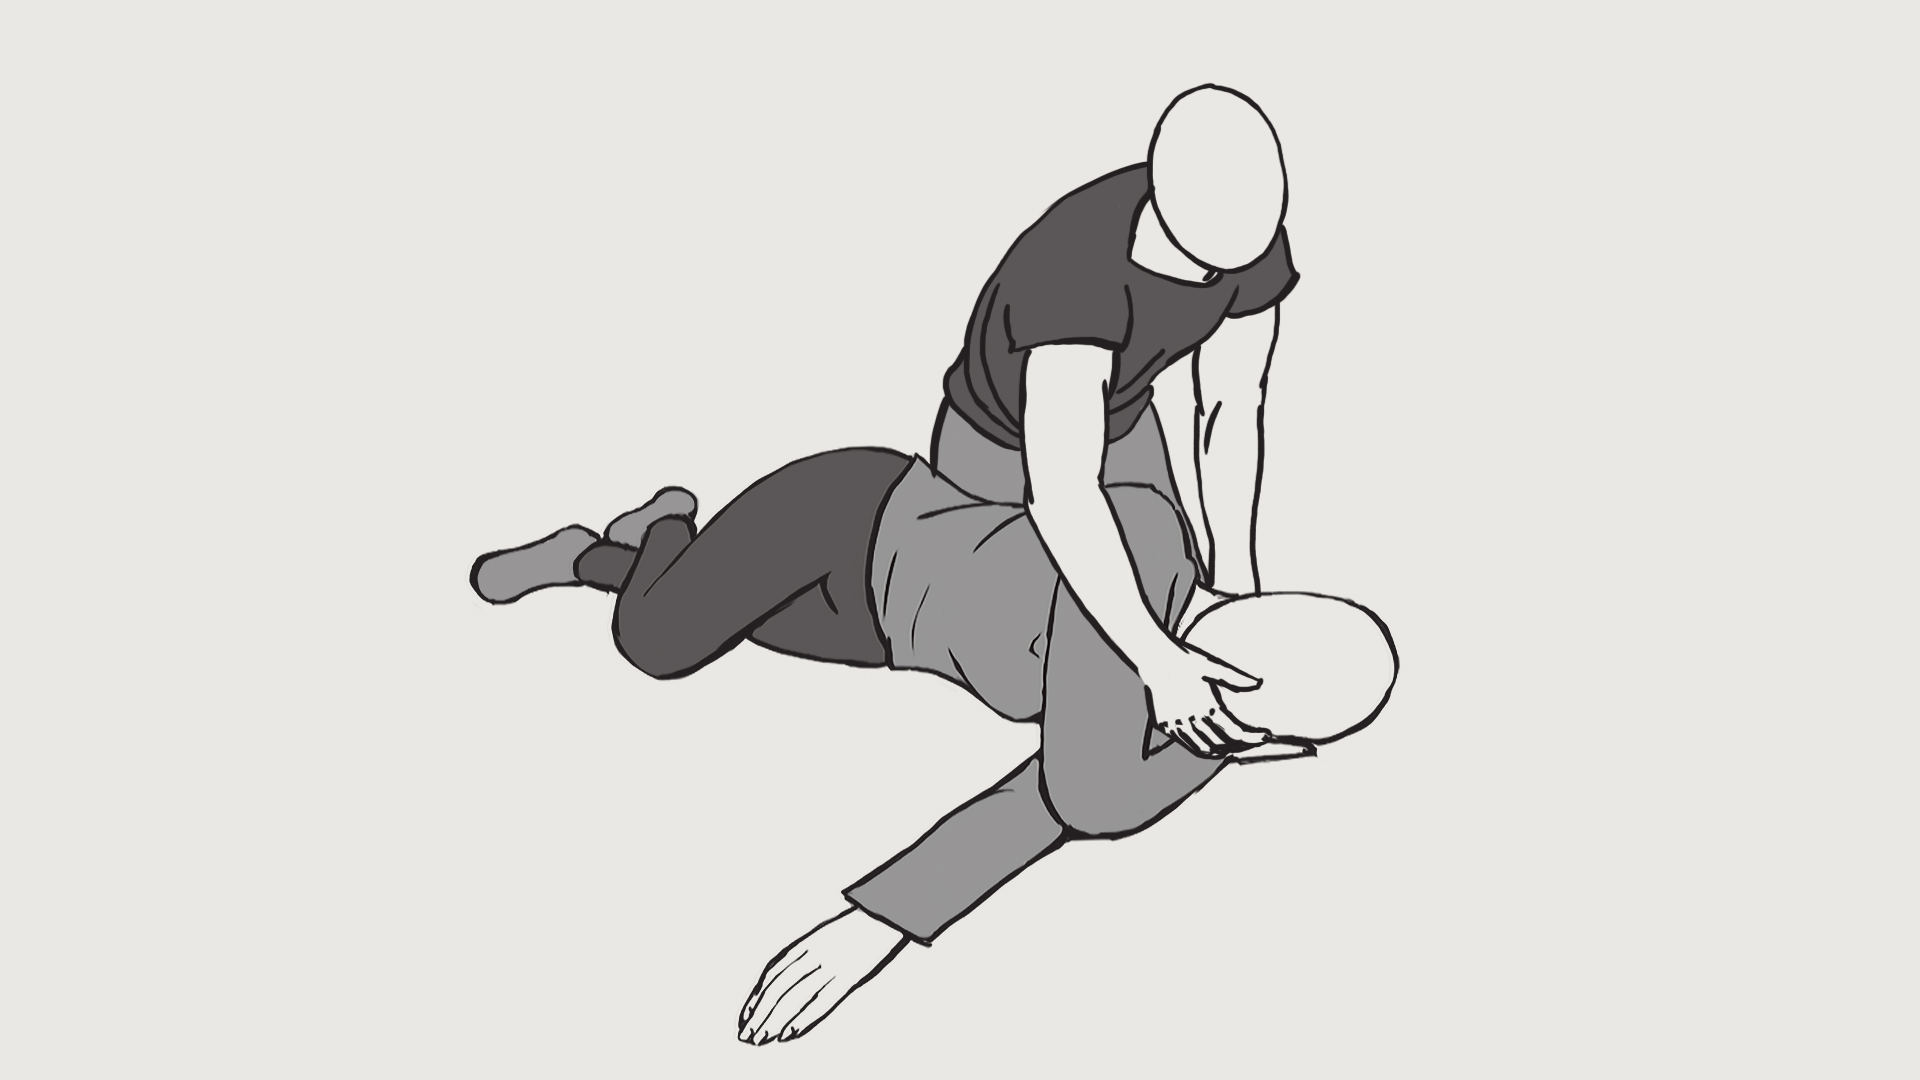 Illustration of a person in recovery position